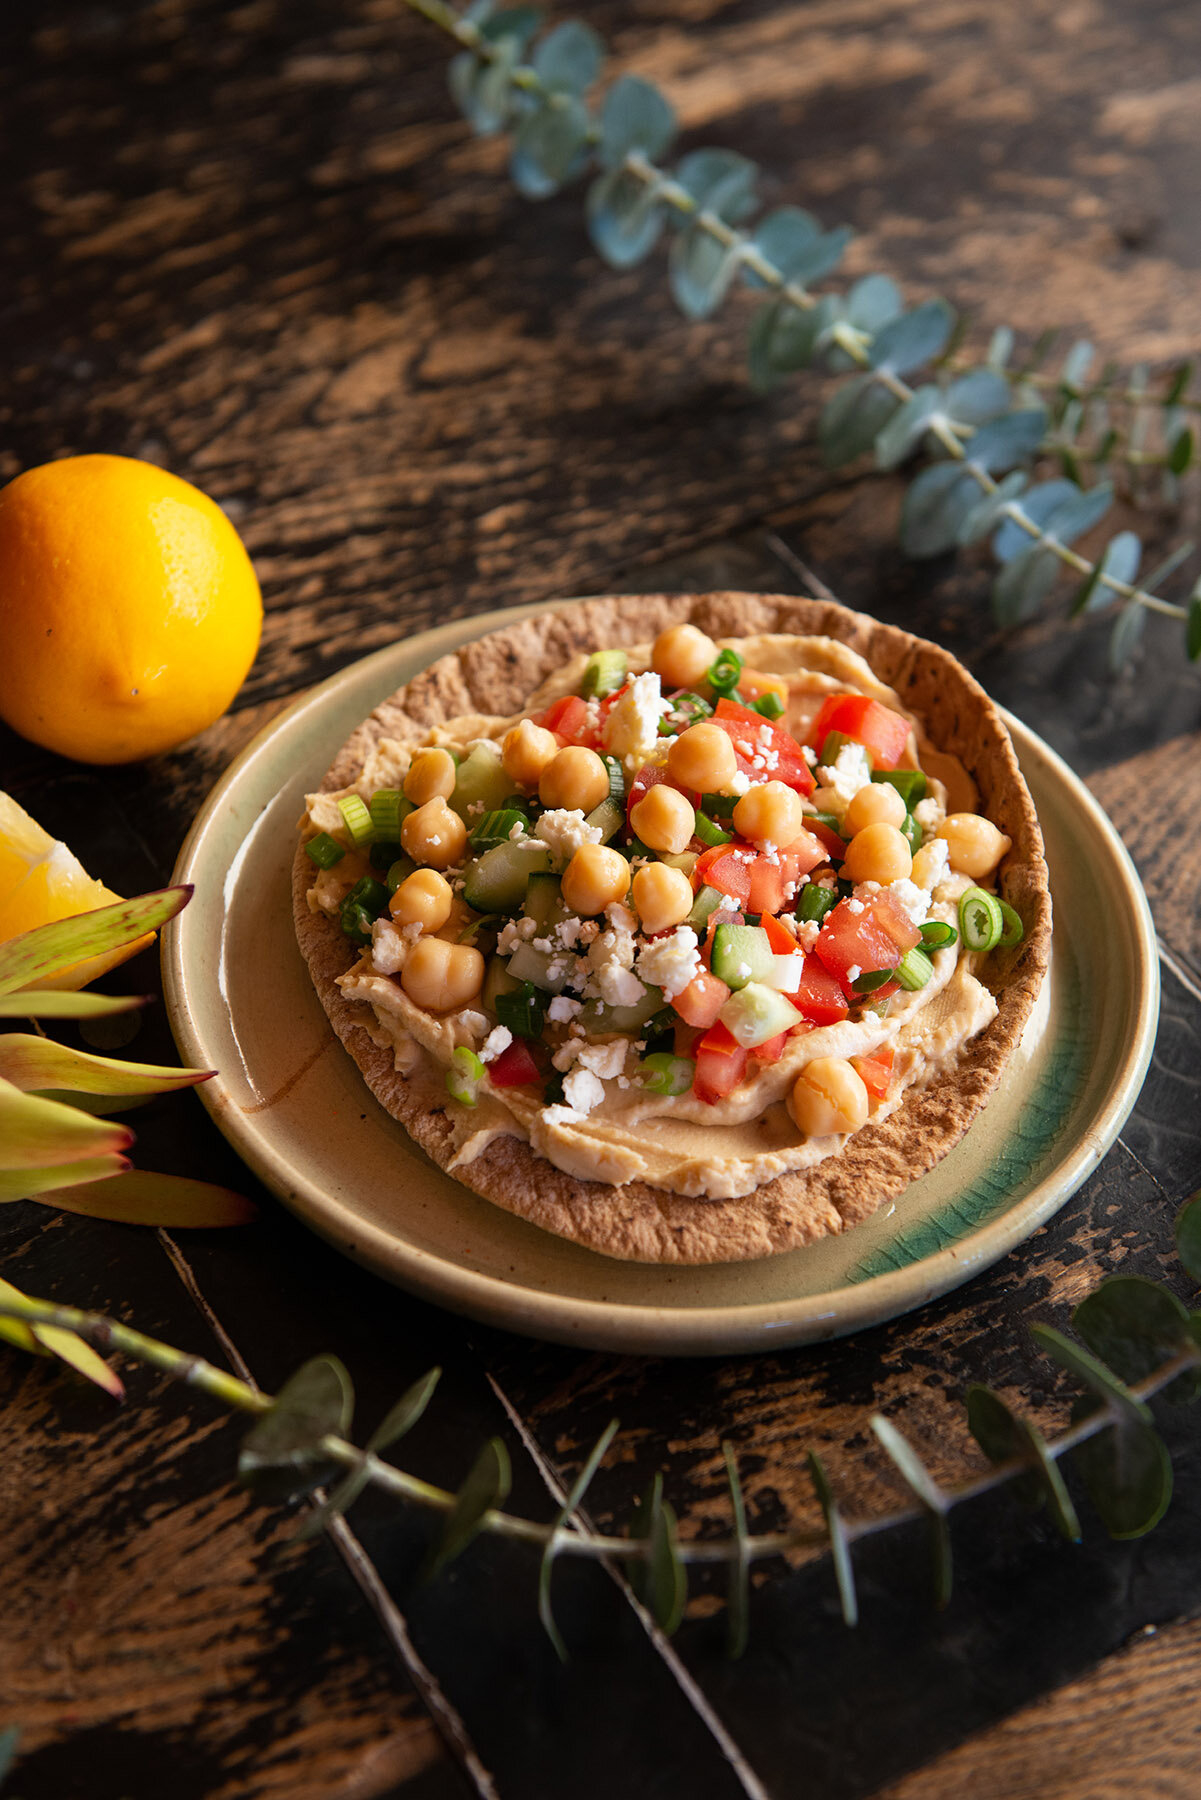 Plate with hummus topped with chickpeas, tomatoes, and herbs, next to a lemon